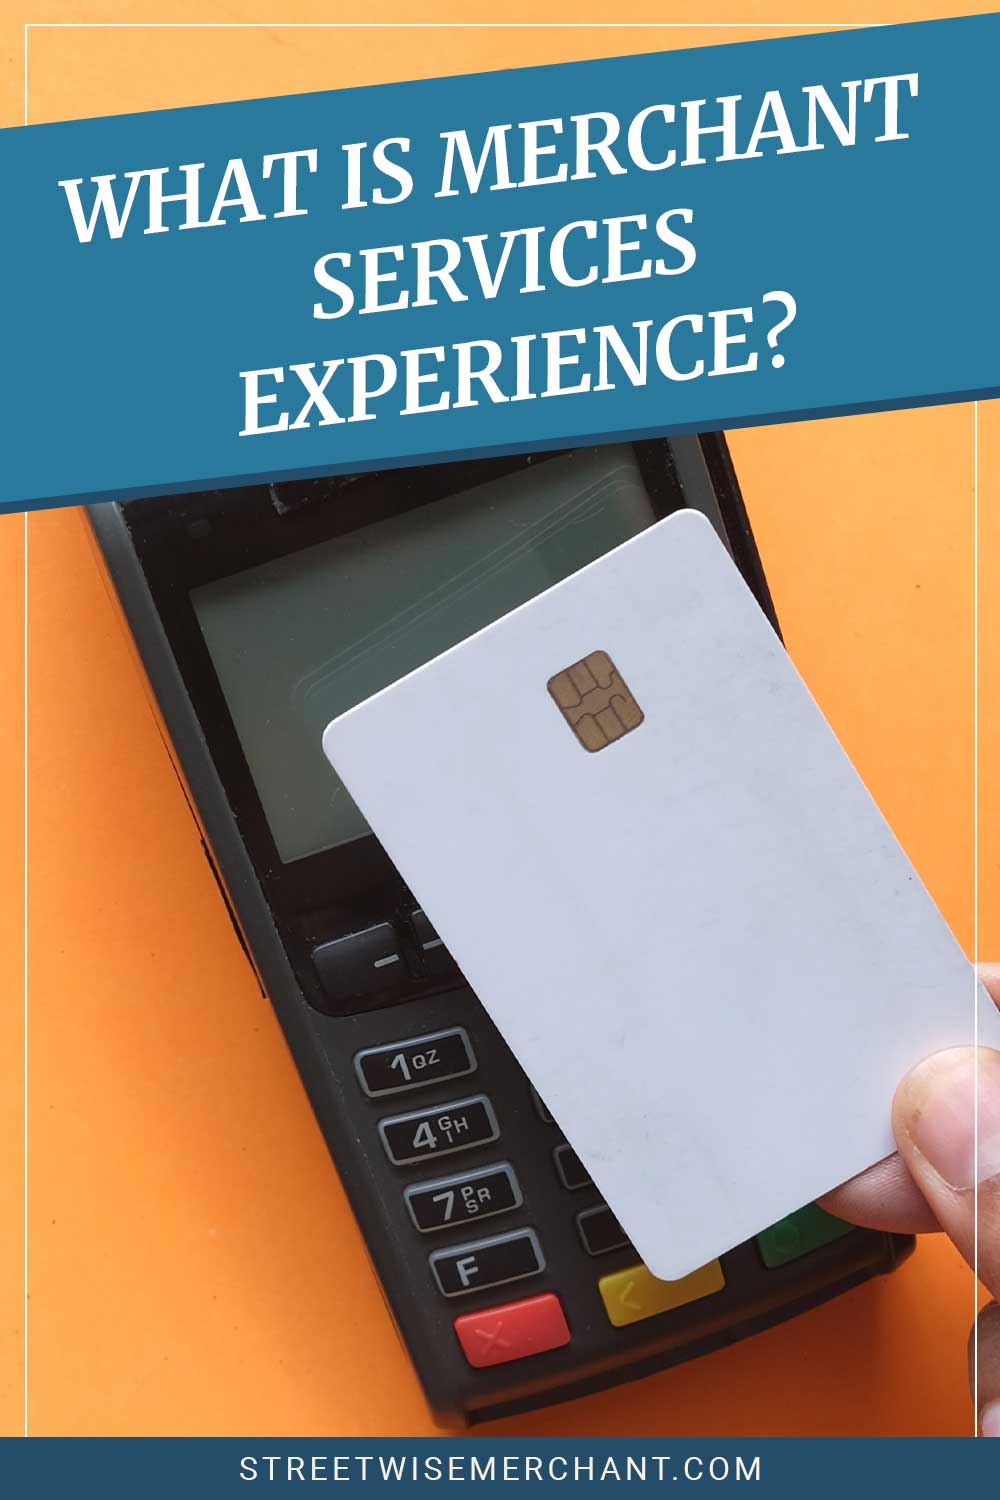 What is Merchant Services Experience?